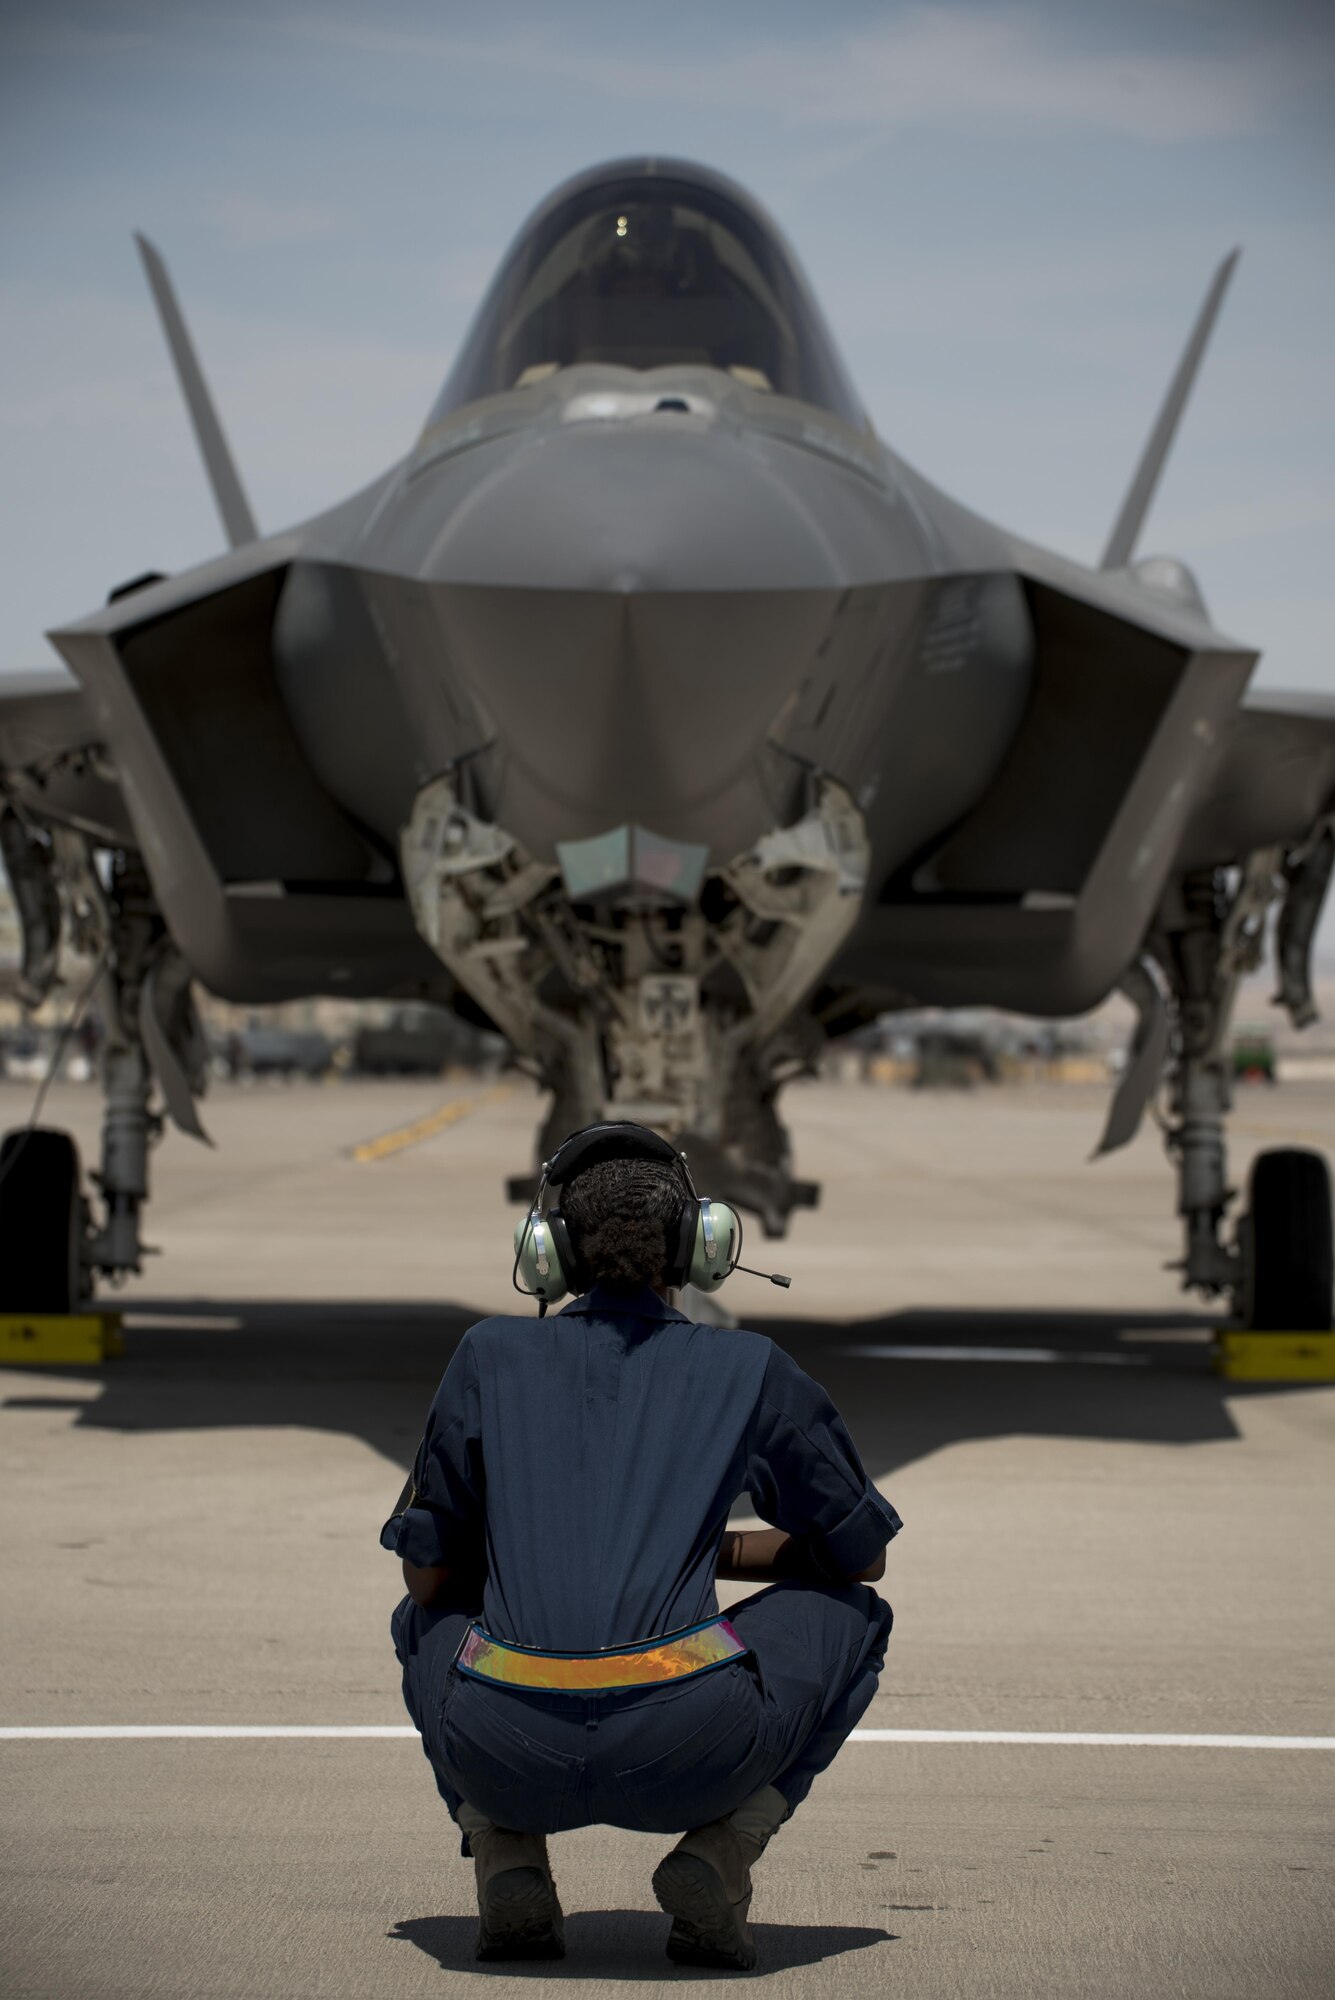 U.S. Air Force Senior Airman Carol Sims, 33rd Aircraft Maintenance Squadron assistant dedicated crew chief, crouches in front of an F-35A Lightning II July 18, 2017, at Nellis Air Force Base, Nev. The 33rd Fighter Wing and Marine Attack Squadron 221 from Yuma, Ariz., participated in the first combat exercise with Air Force F-35As and Marine Corps F-35Bs operating simultaneously during Red Flag 17-3. The large scale exercise, which was developed to provide pilots with critical experience in combat situations, enabled F-35 pilots to plan and train using the same tactics, techniques and procedures. (U.S. Air Force photo by Staff Sgt. Peter Thompson)